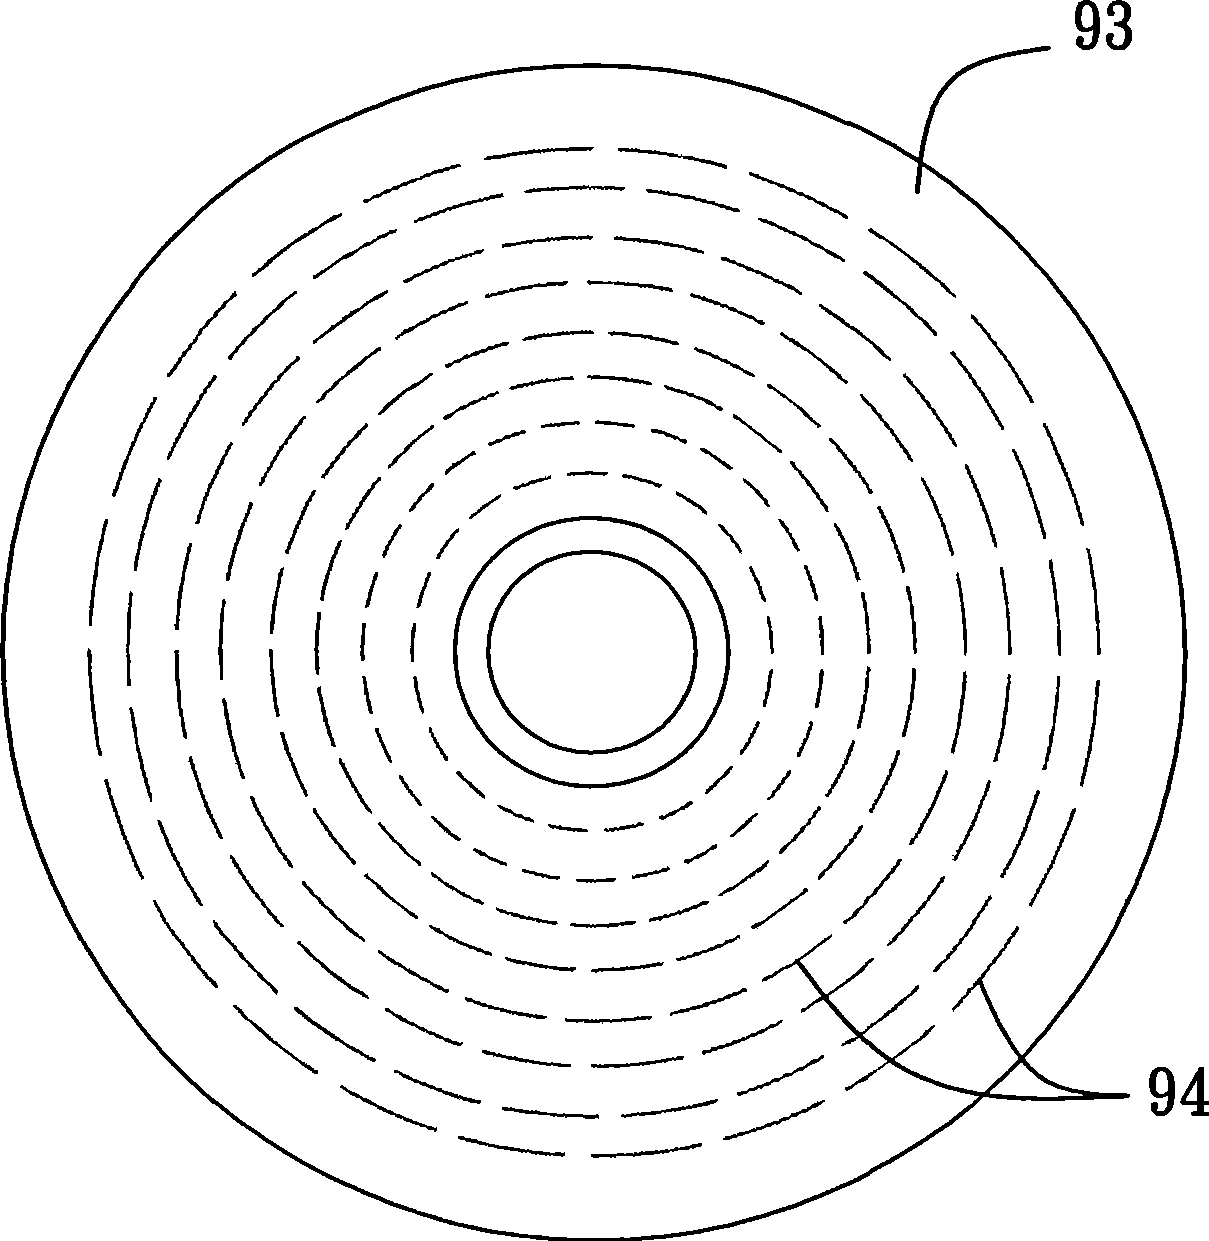 Gas-spreading device for aeration system